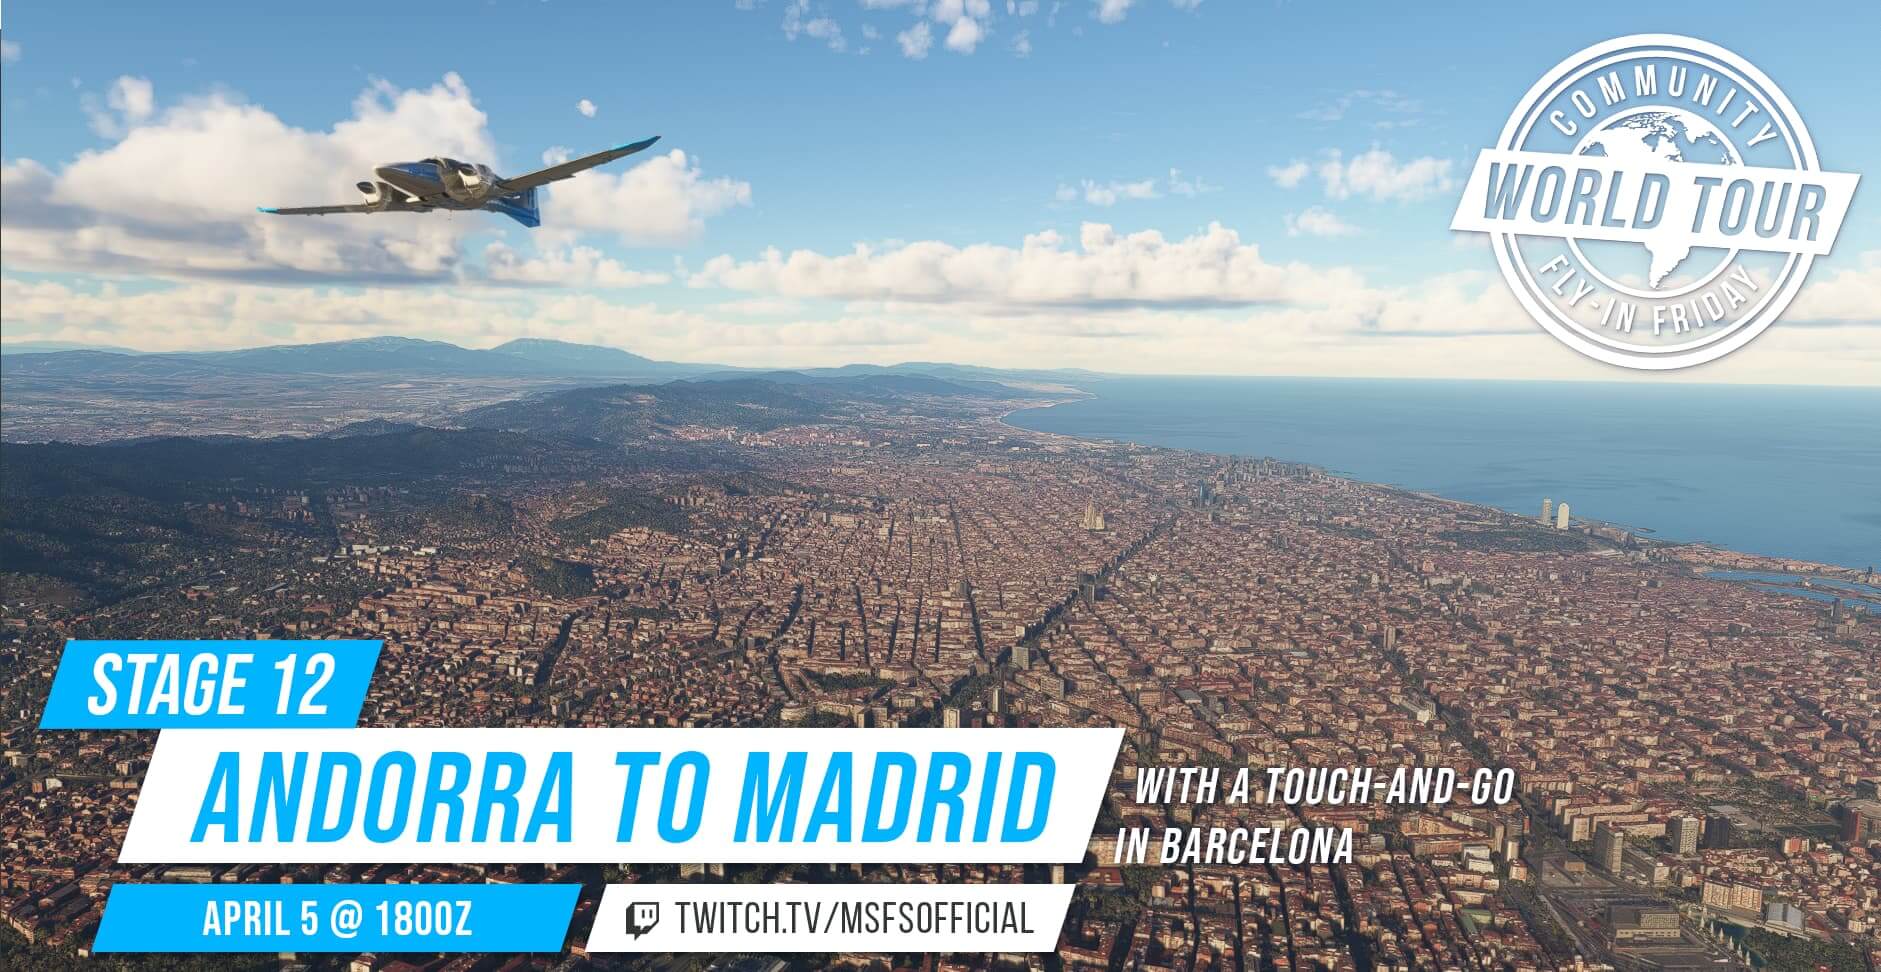 Community Fly-In Friday: World Tour Stage 12, Andorra to Madrid. April 5th at 1800 UTC. twitch.tv/msfsofficial